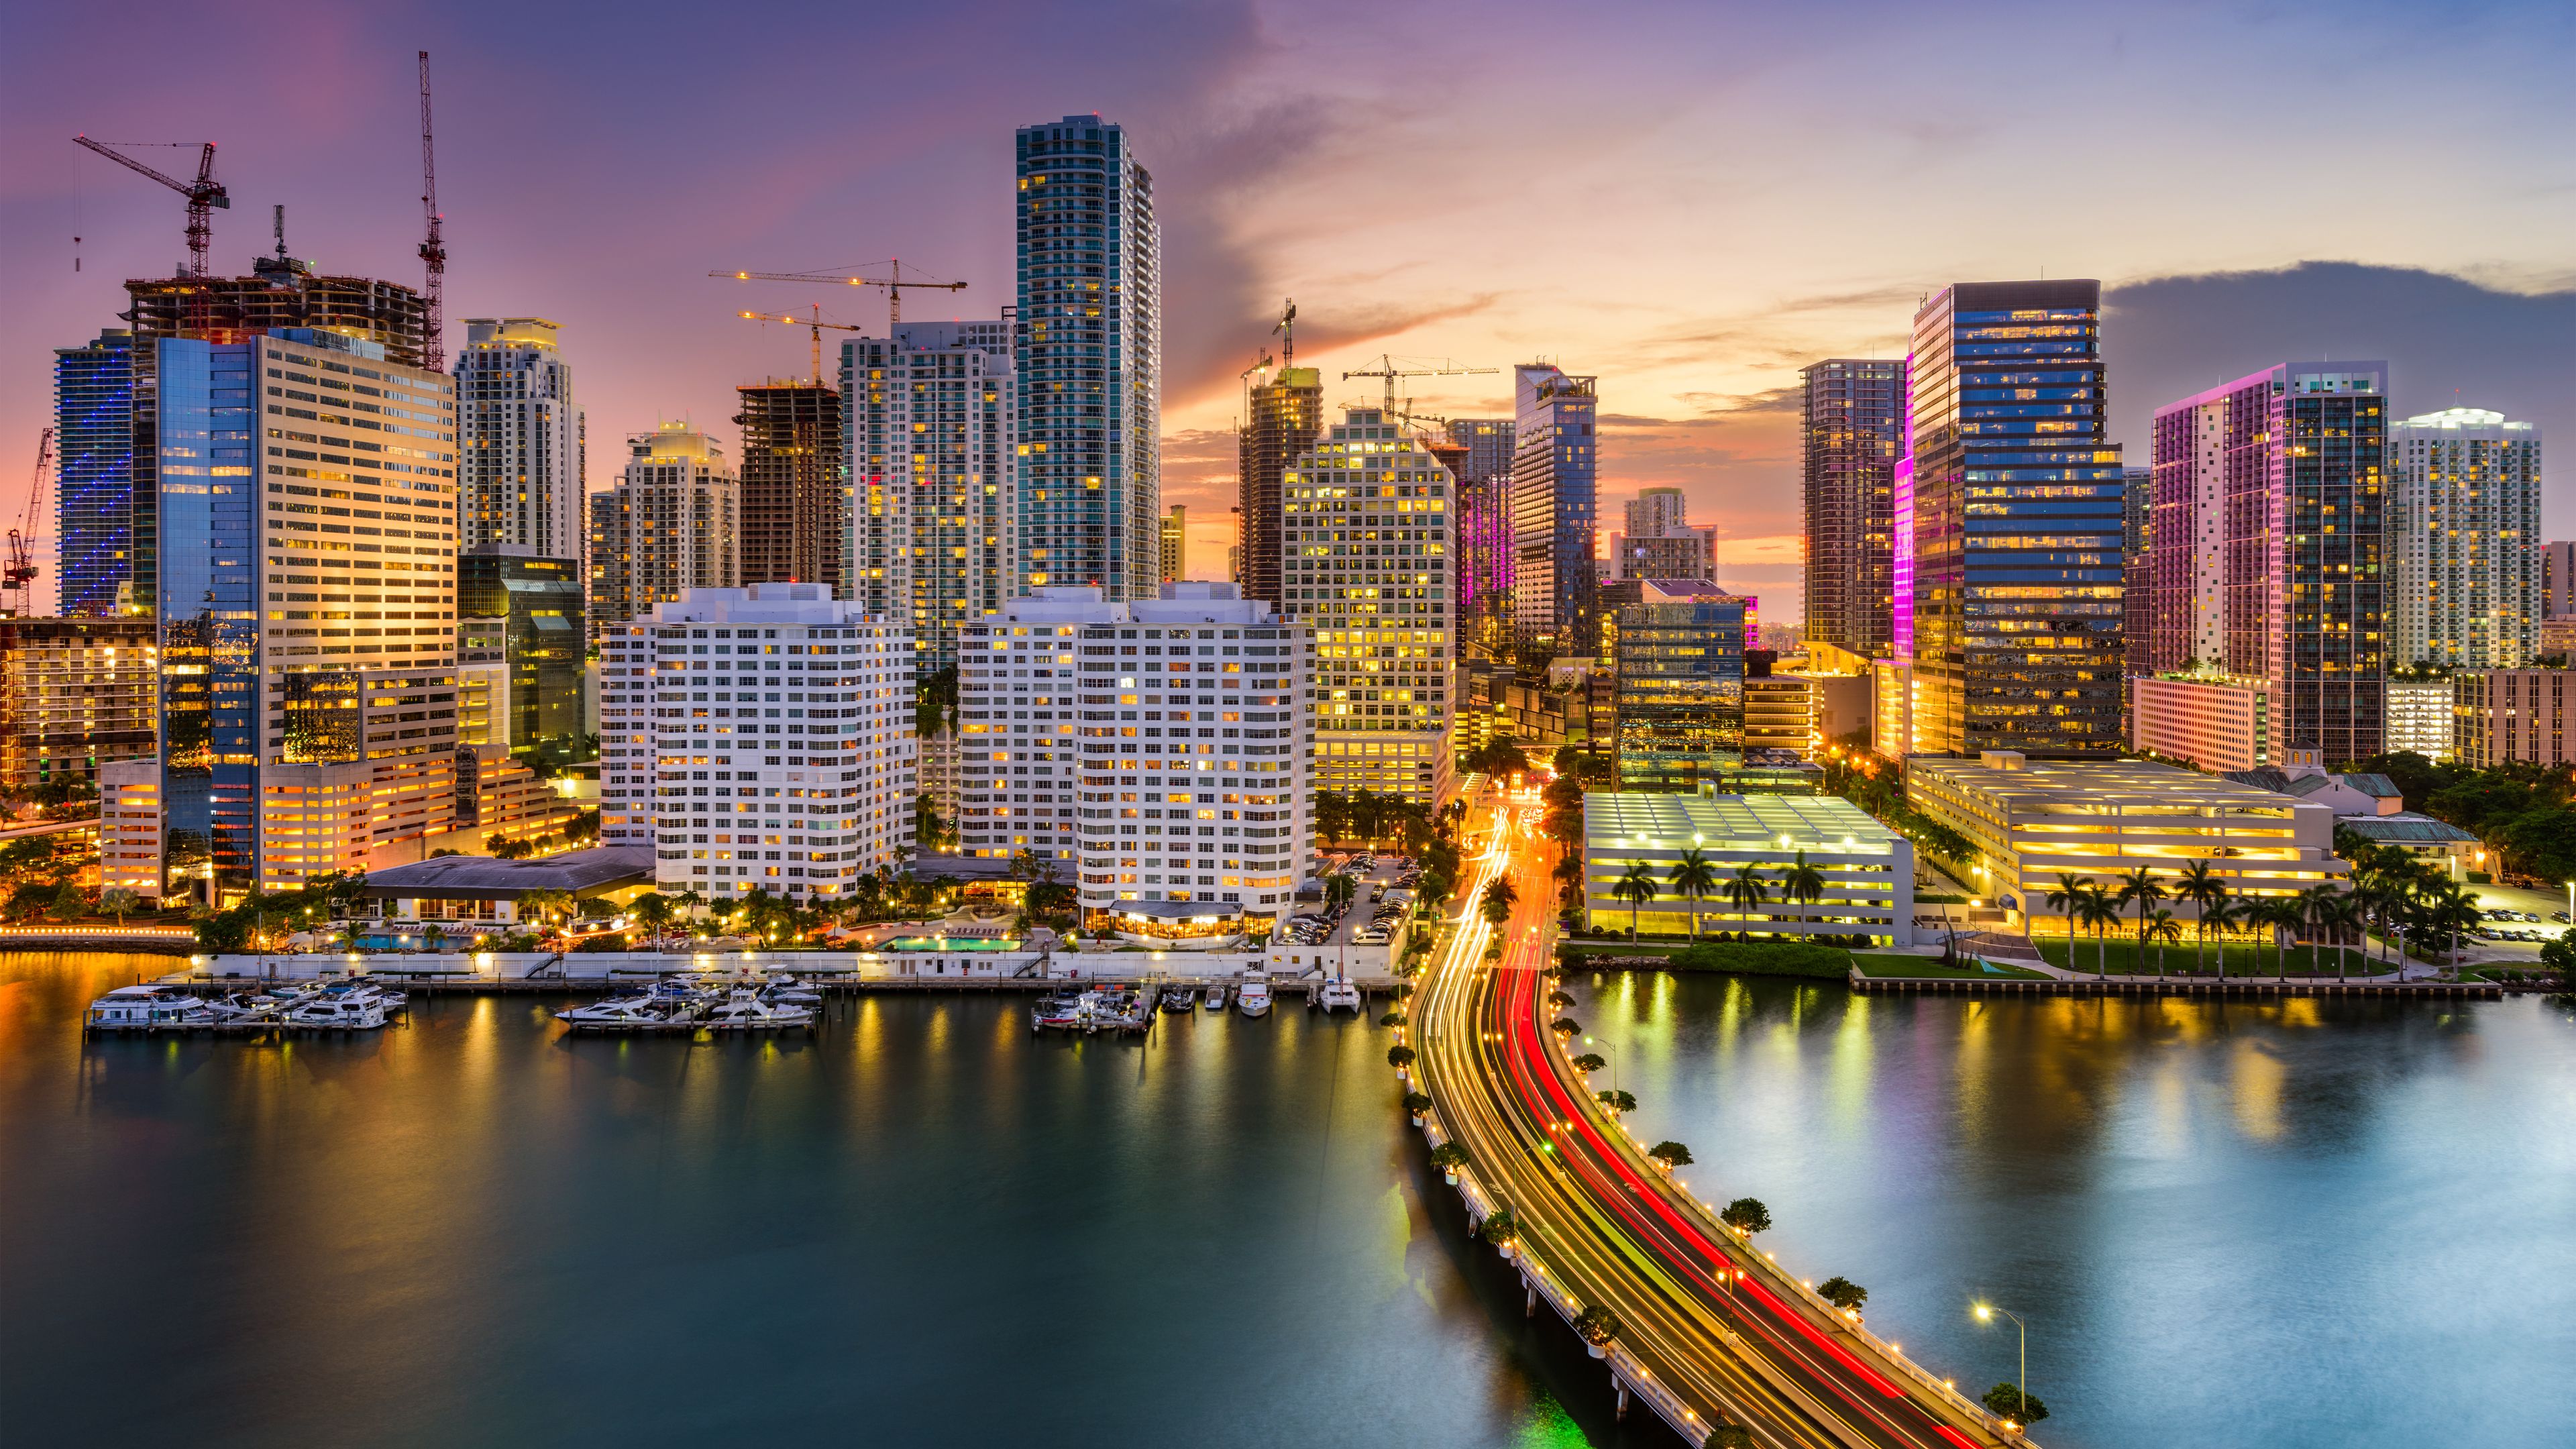 Miami Florida - Discover Top Things to Do in Miami FL